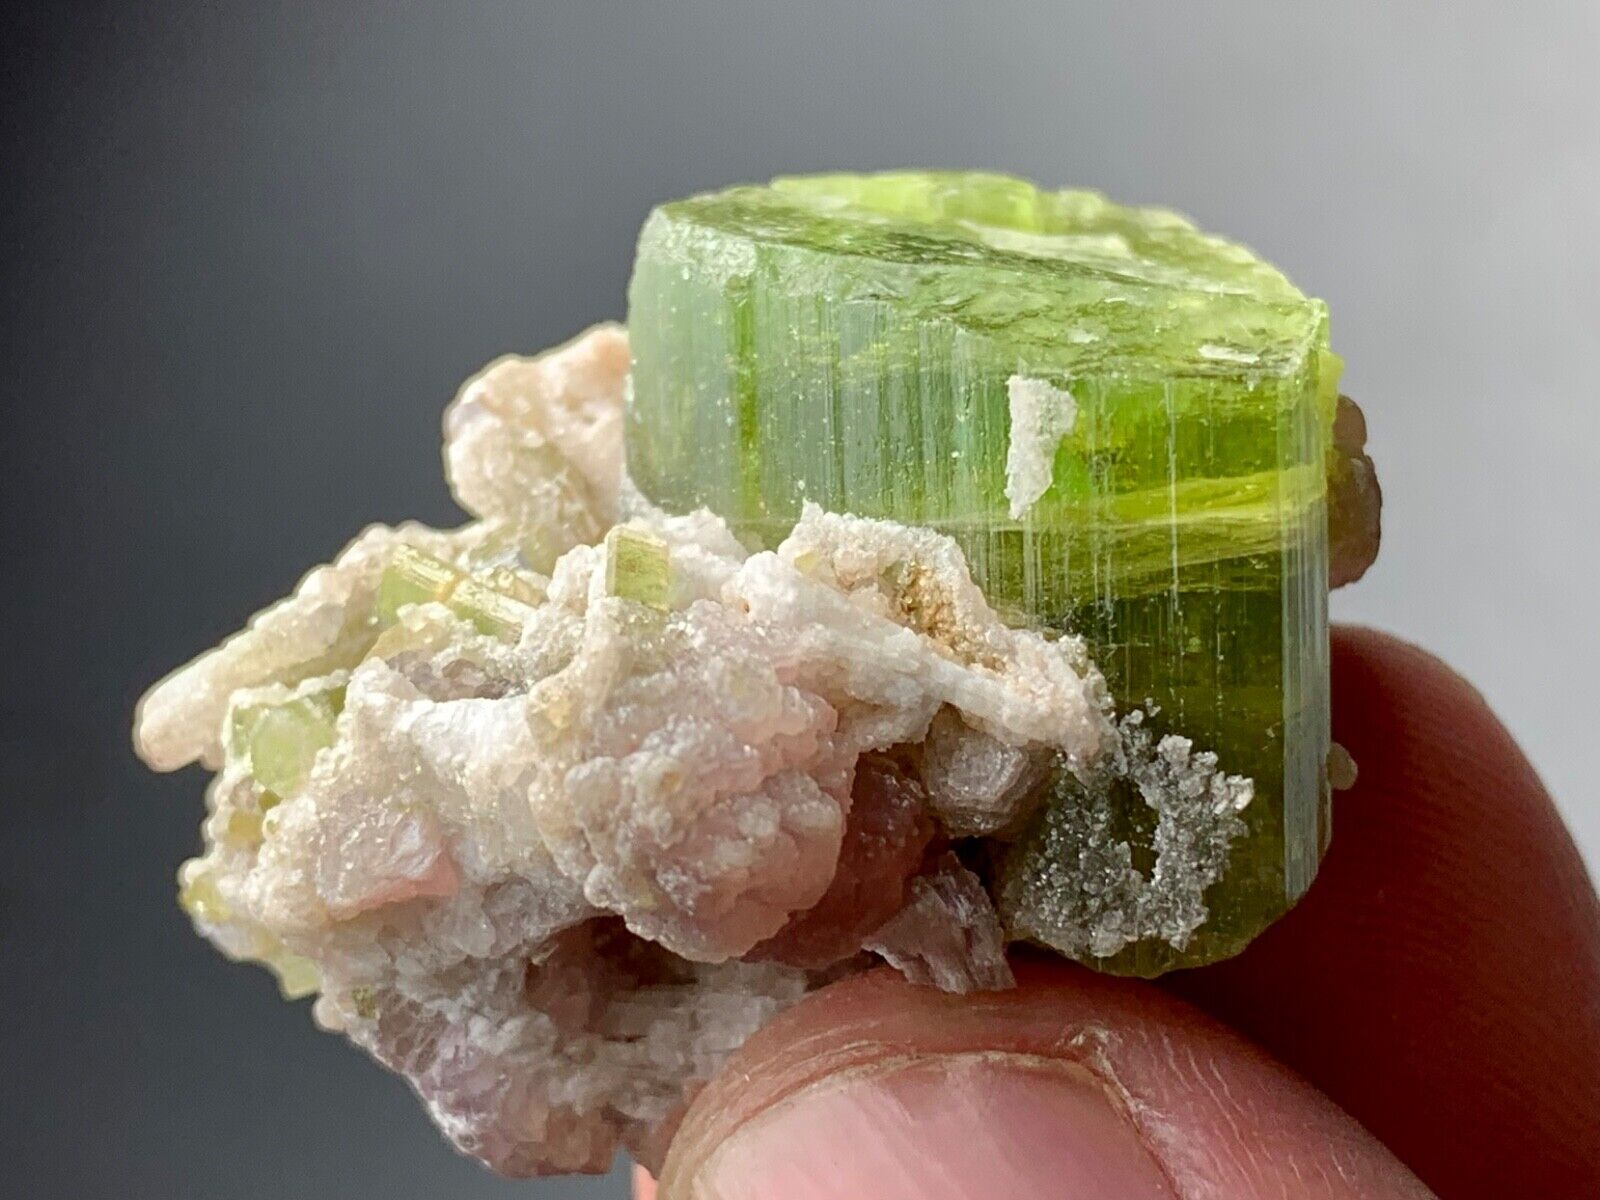 155 Carats Tourmaline Crystal Specimen From Afghanistan